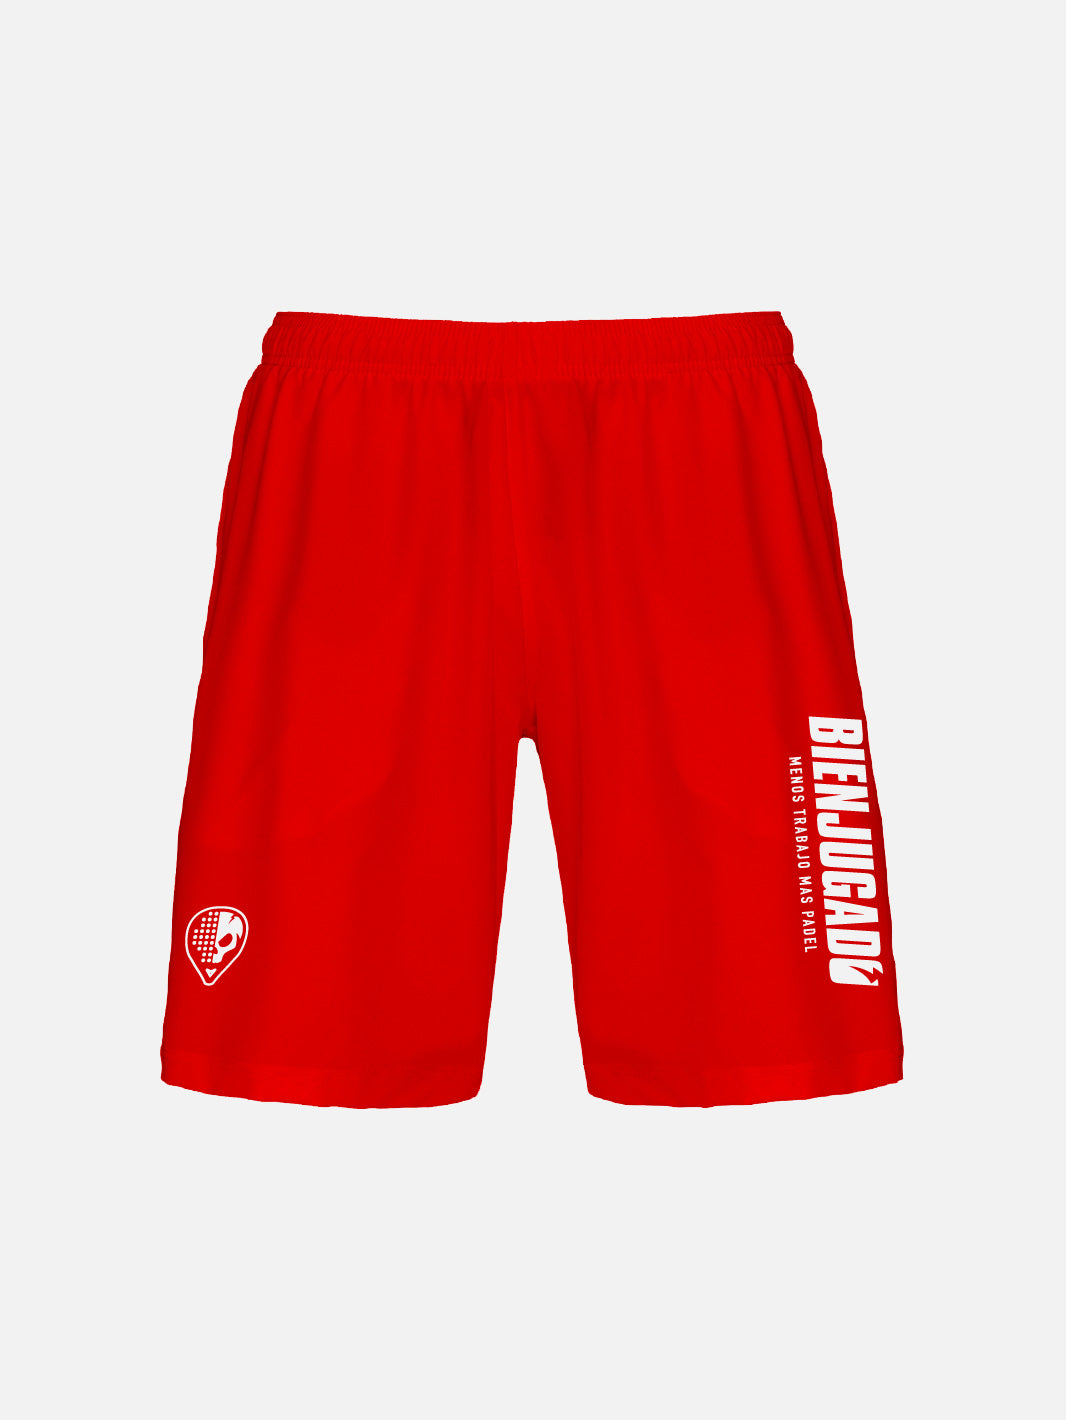 Men'S Shorts - Red